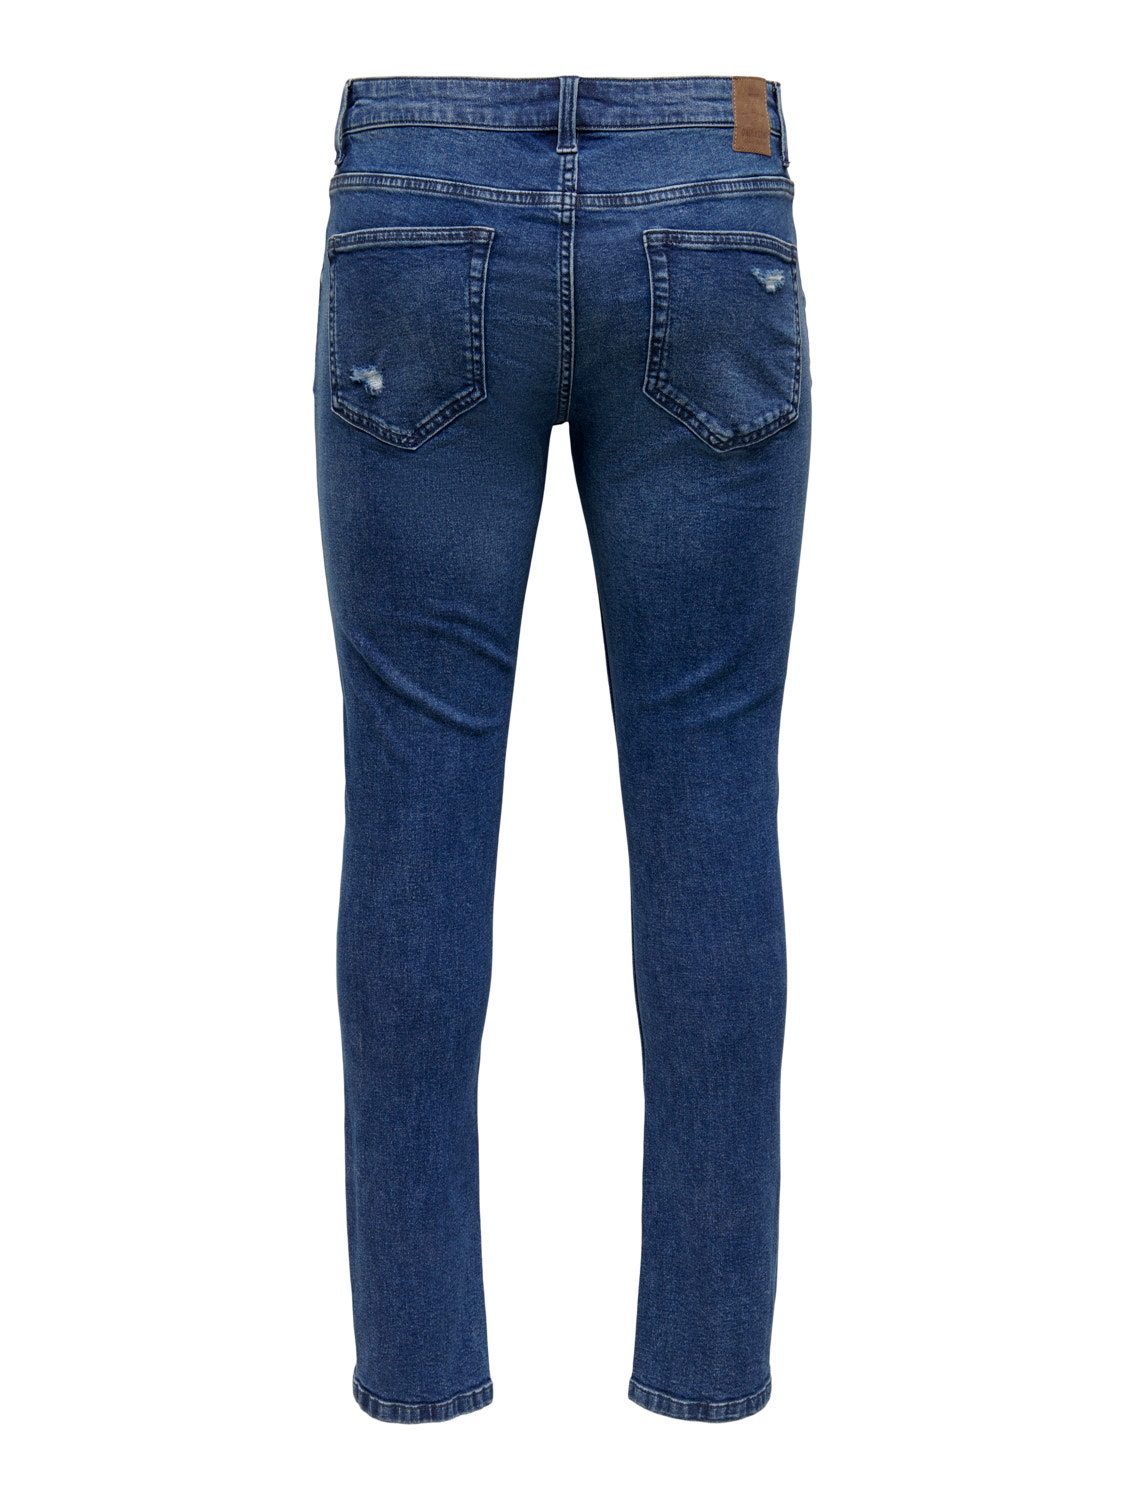 ONLY & SONS Jeans Slim Fit Taille moyenne Ourlé destroy -Blue Denim - 22022374